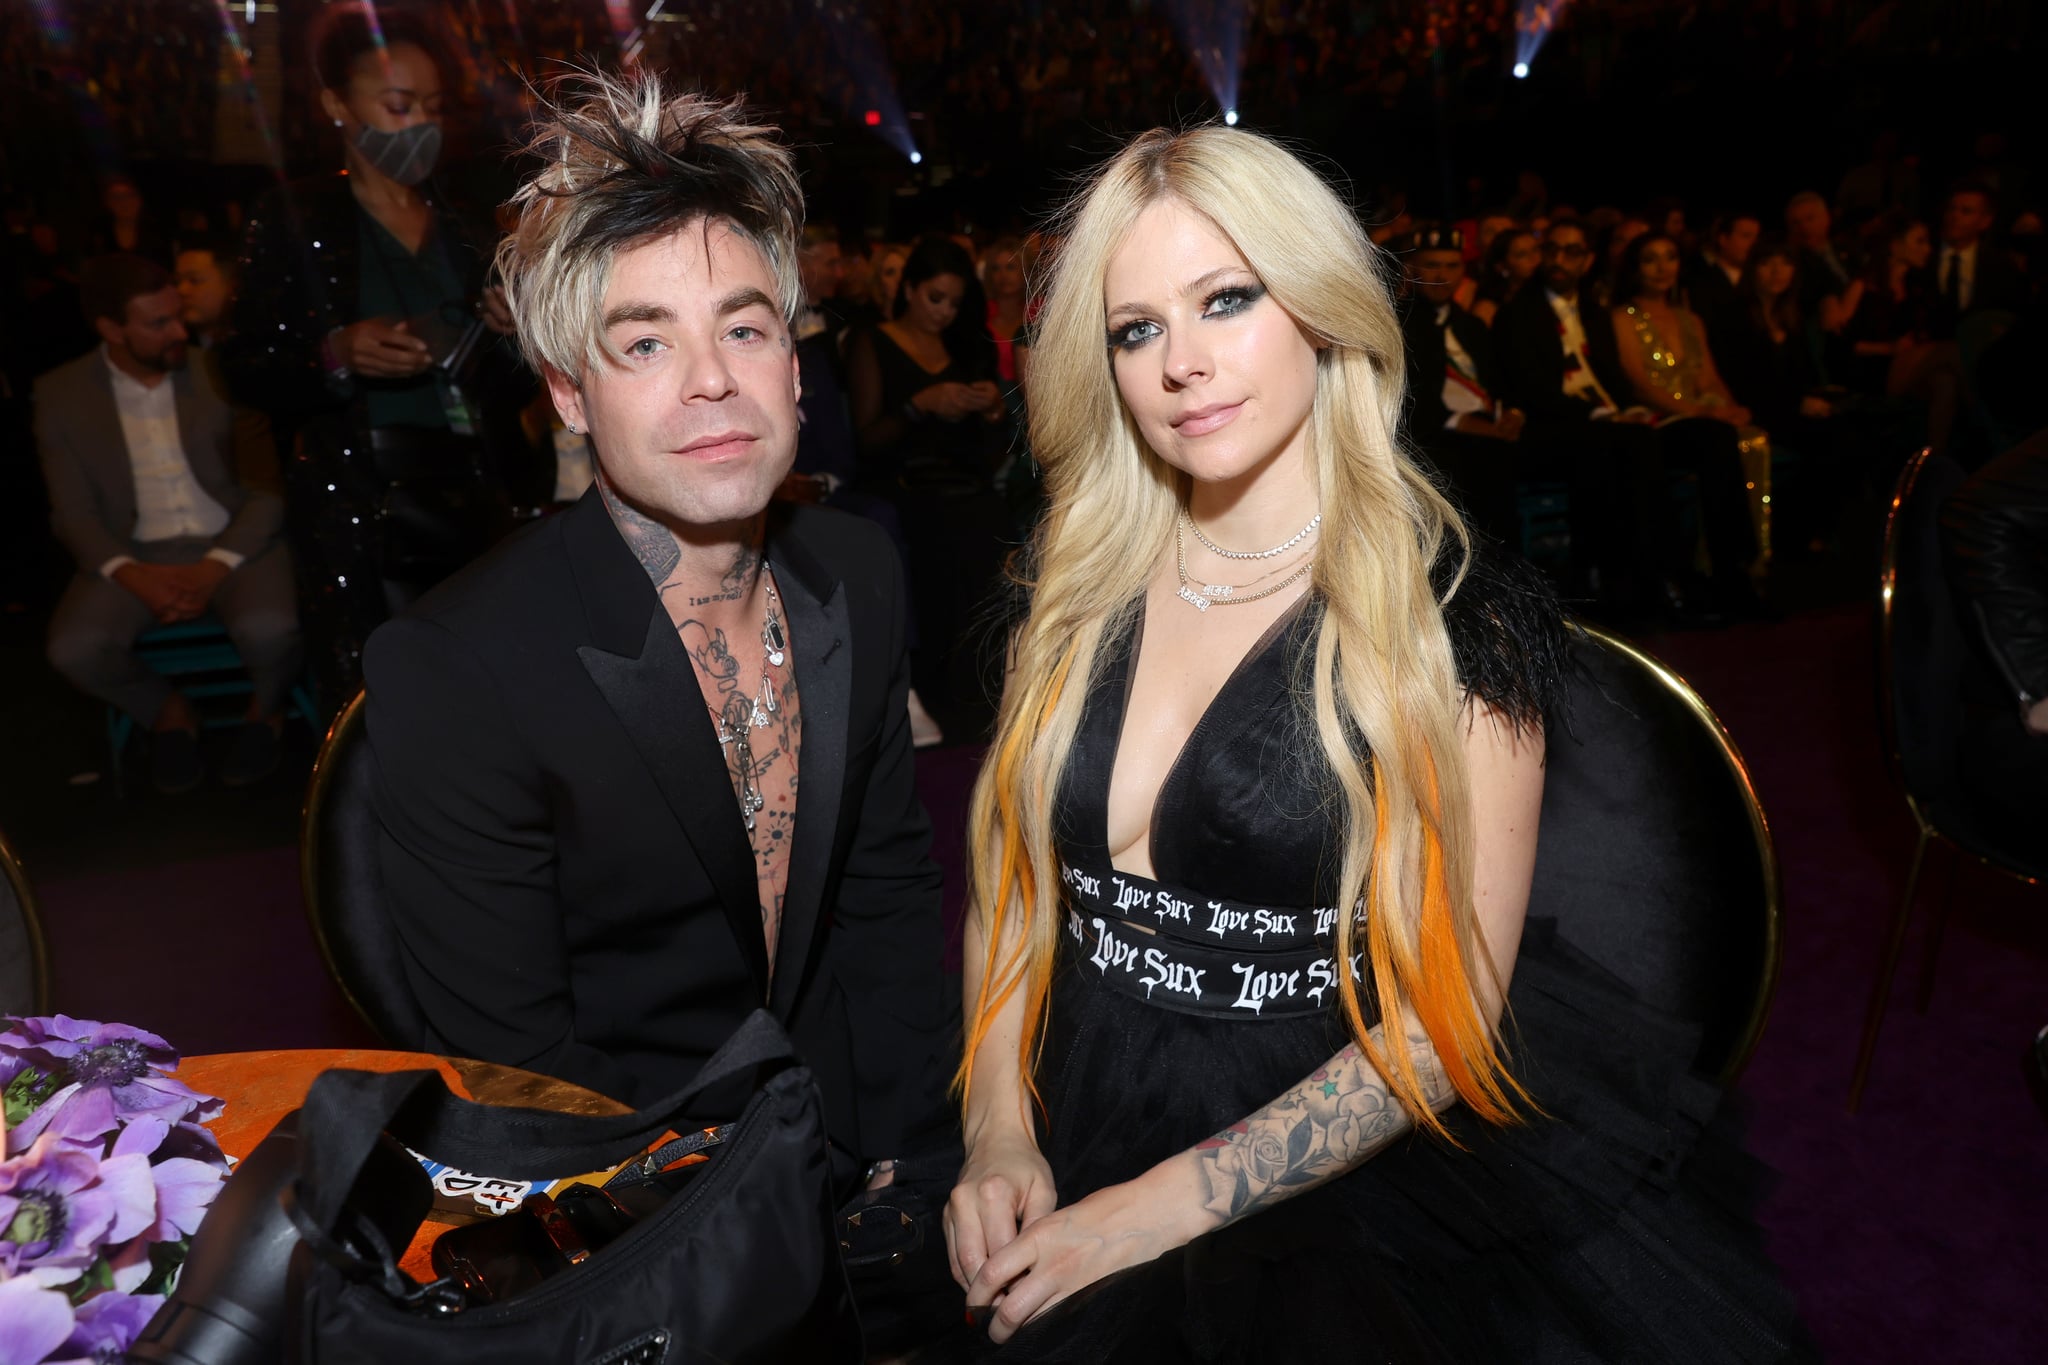 LAS VEGAS, NEVADA - APRIL 03: (L-R) Mod Sun and Avril Lavigne attend the 64th Annual GRAMMY Awards at MGM Grand Garden Arena on April 03, 2022 in Las Vegas, Nevada. (Photo by Emma McIntyre/Getty Images for The Recording Academy)